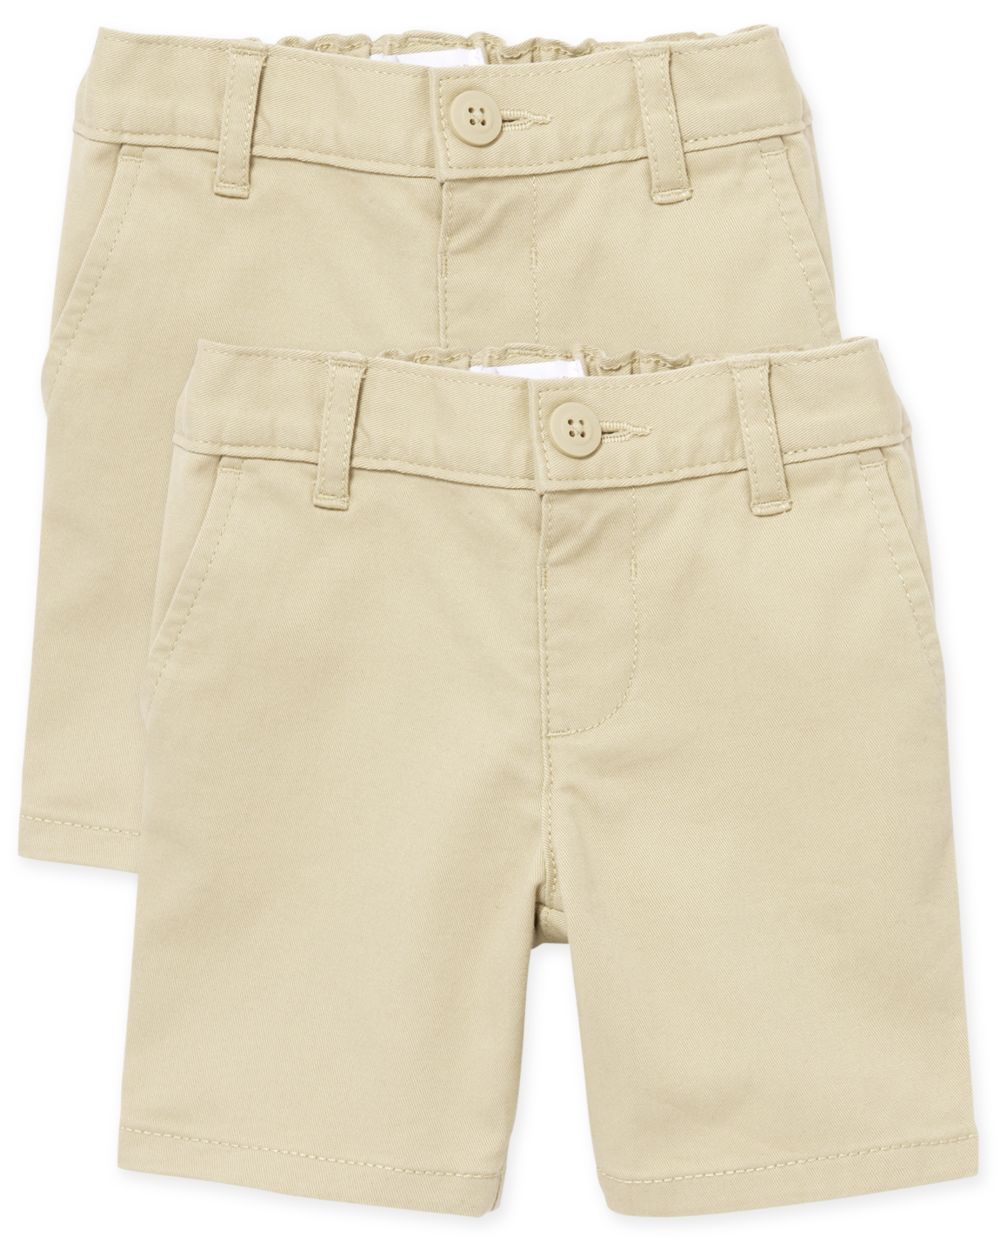 

s Toddler Uniform Chino Shorts 2-Pack - Tan - The Children's Place